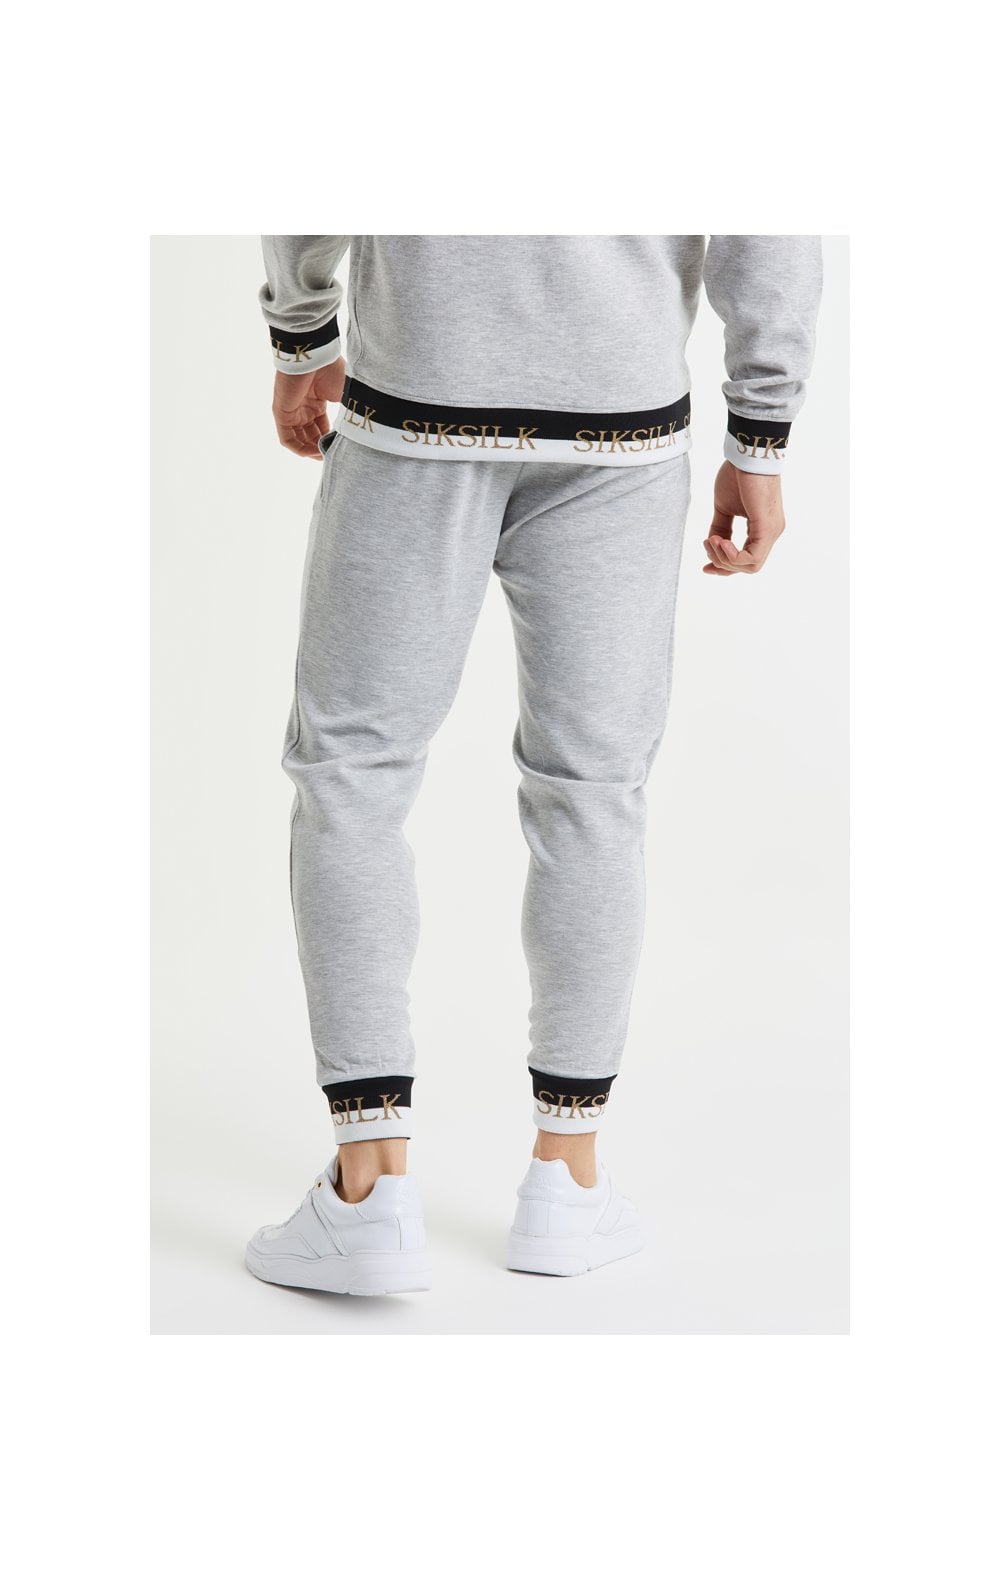 SikSilk Deluxe Fitted Jogger - Grey Marl (3)